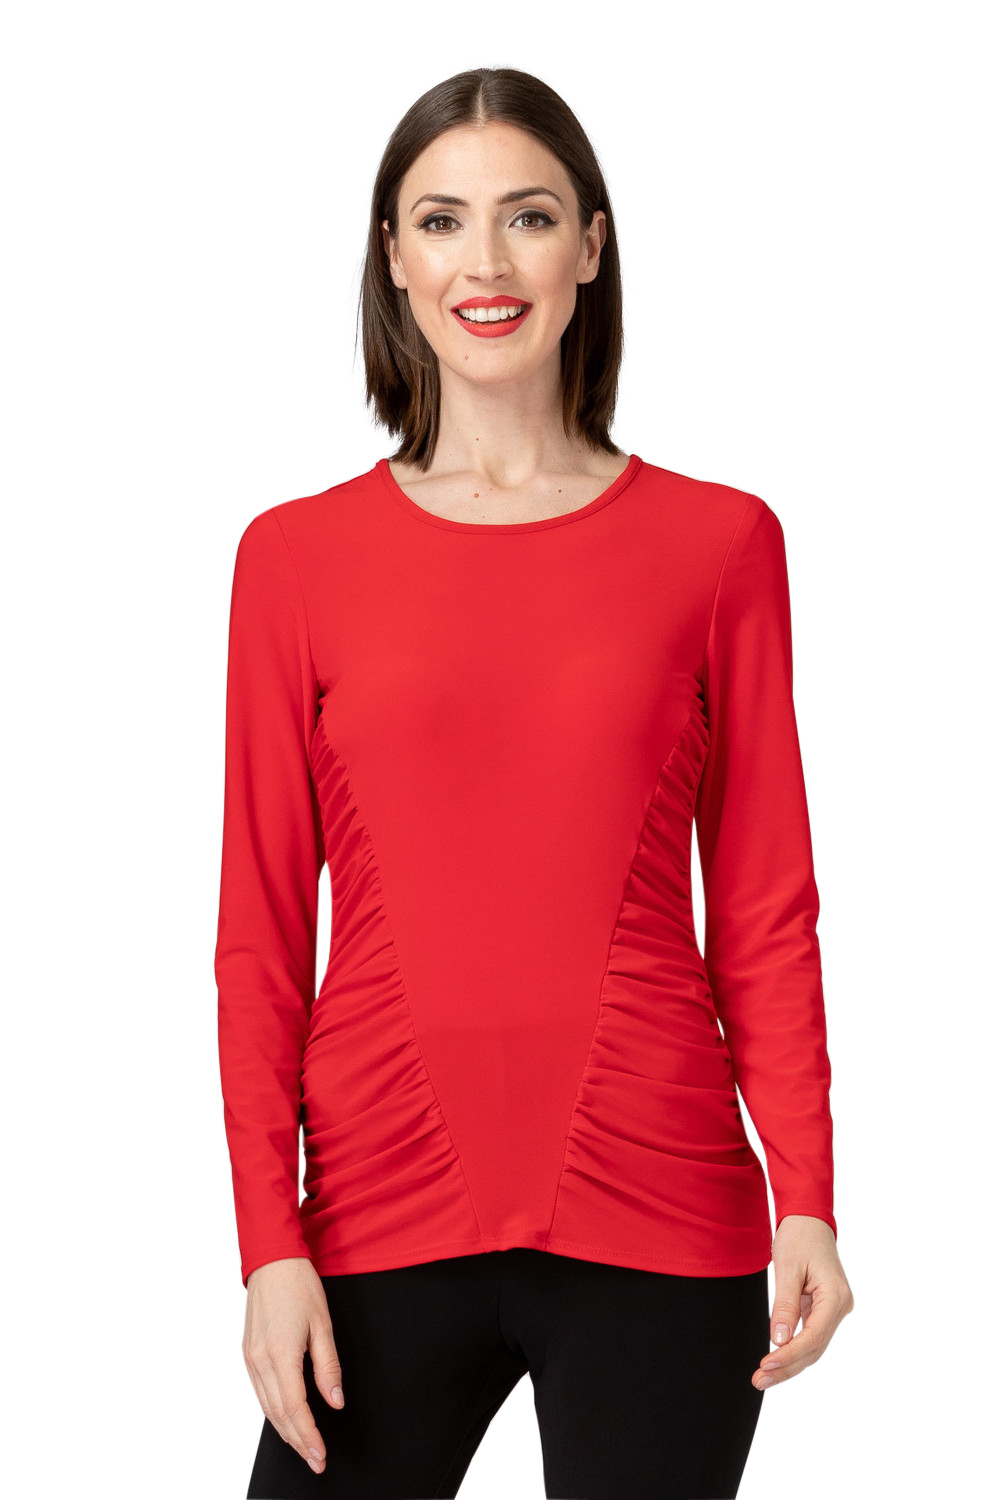 Joseph Ribkoff Tee-Shirt style 193143. Rouge A Levres 173